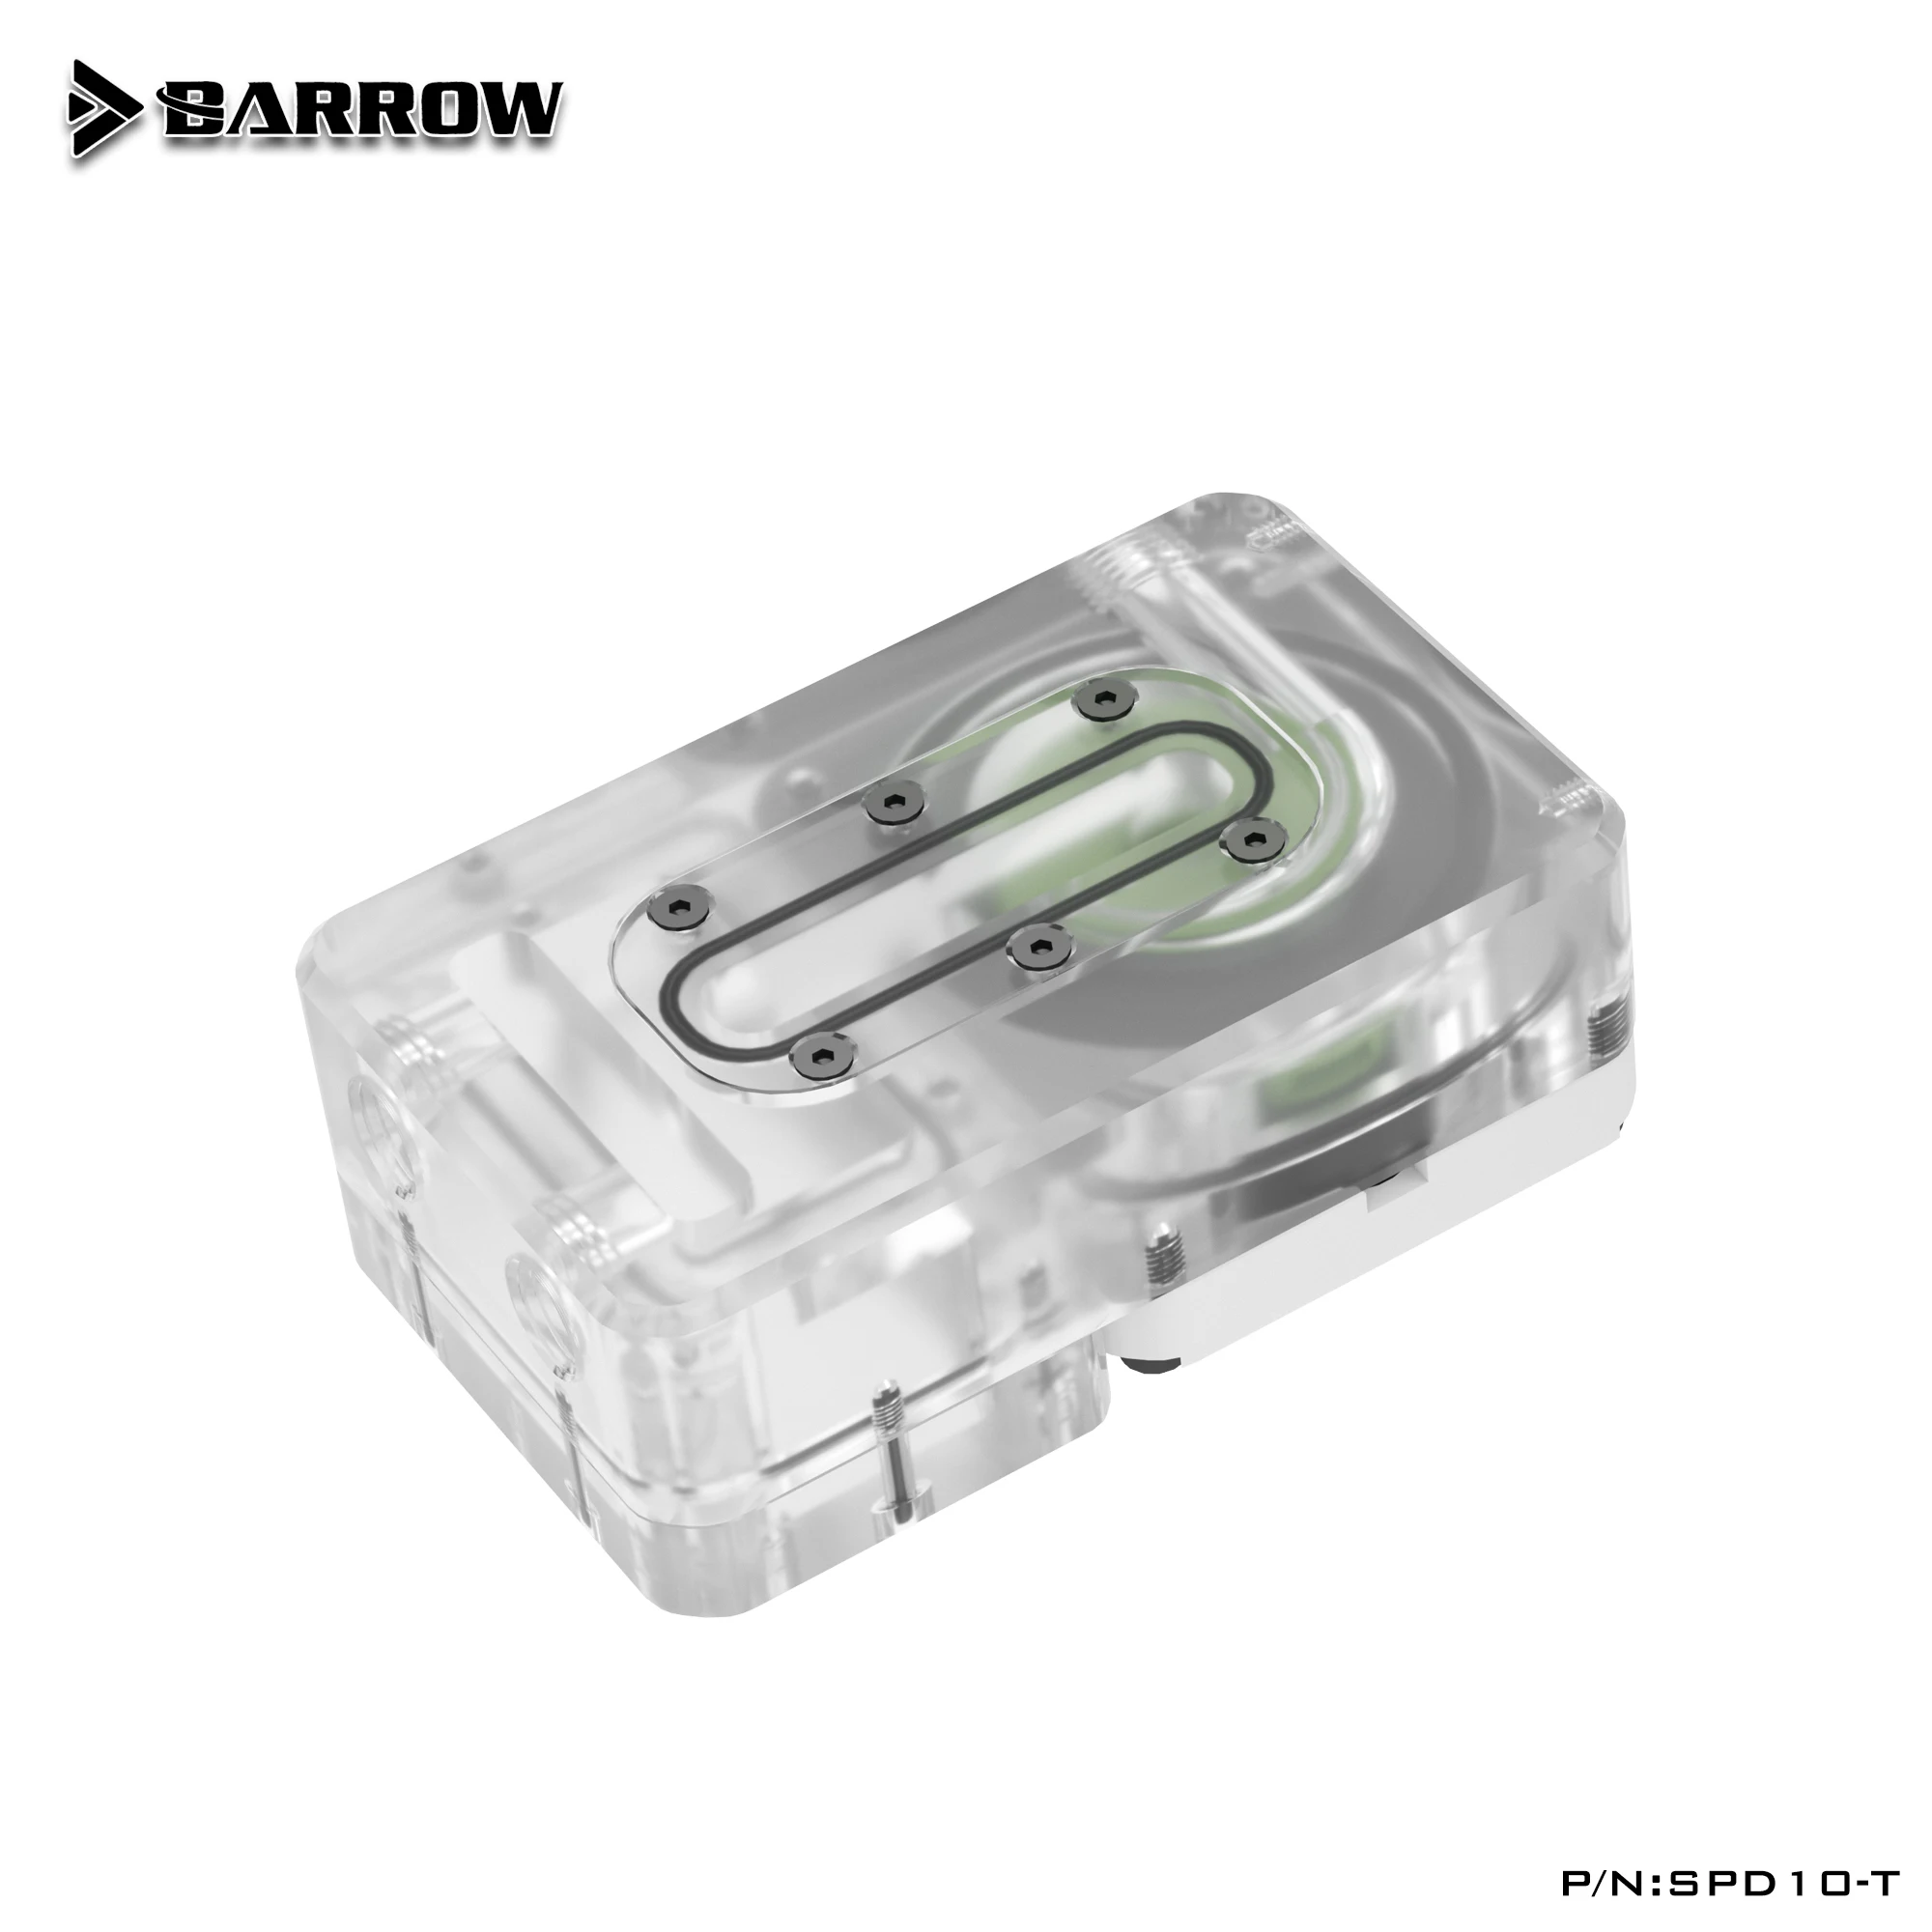 Barrow DC12V 10W PWM Water Cooler Integrated Pump Water Tank for ITX Case MINI Pump Reservoir Water Cooling System SPD10-T enlarge